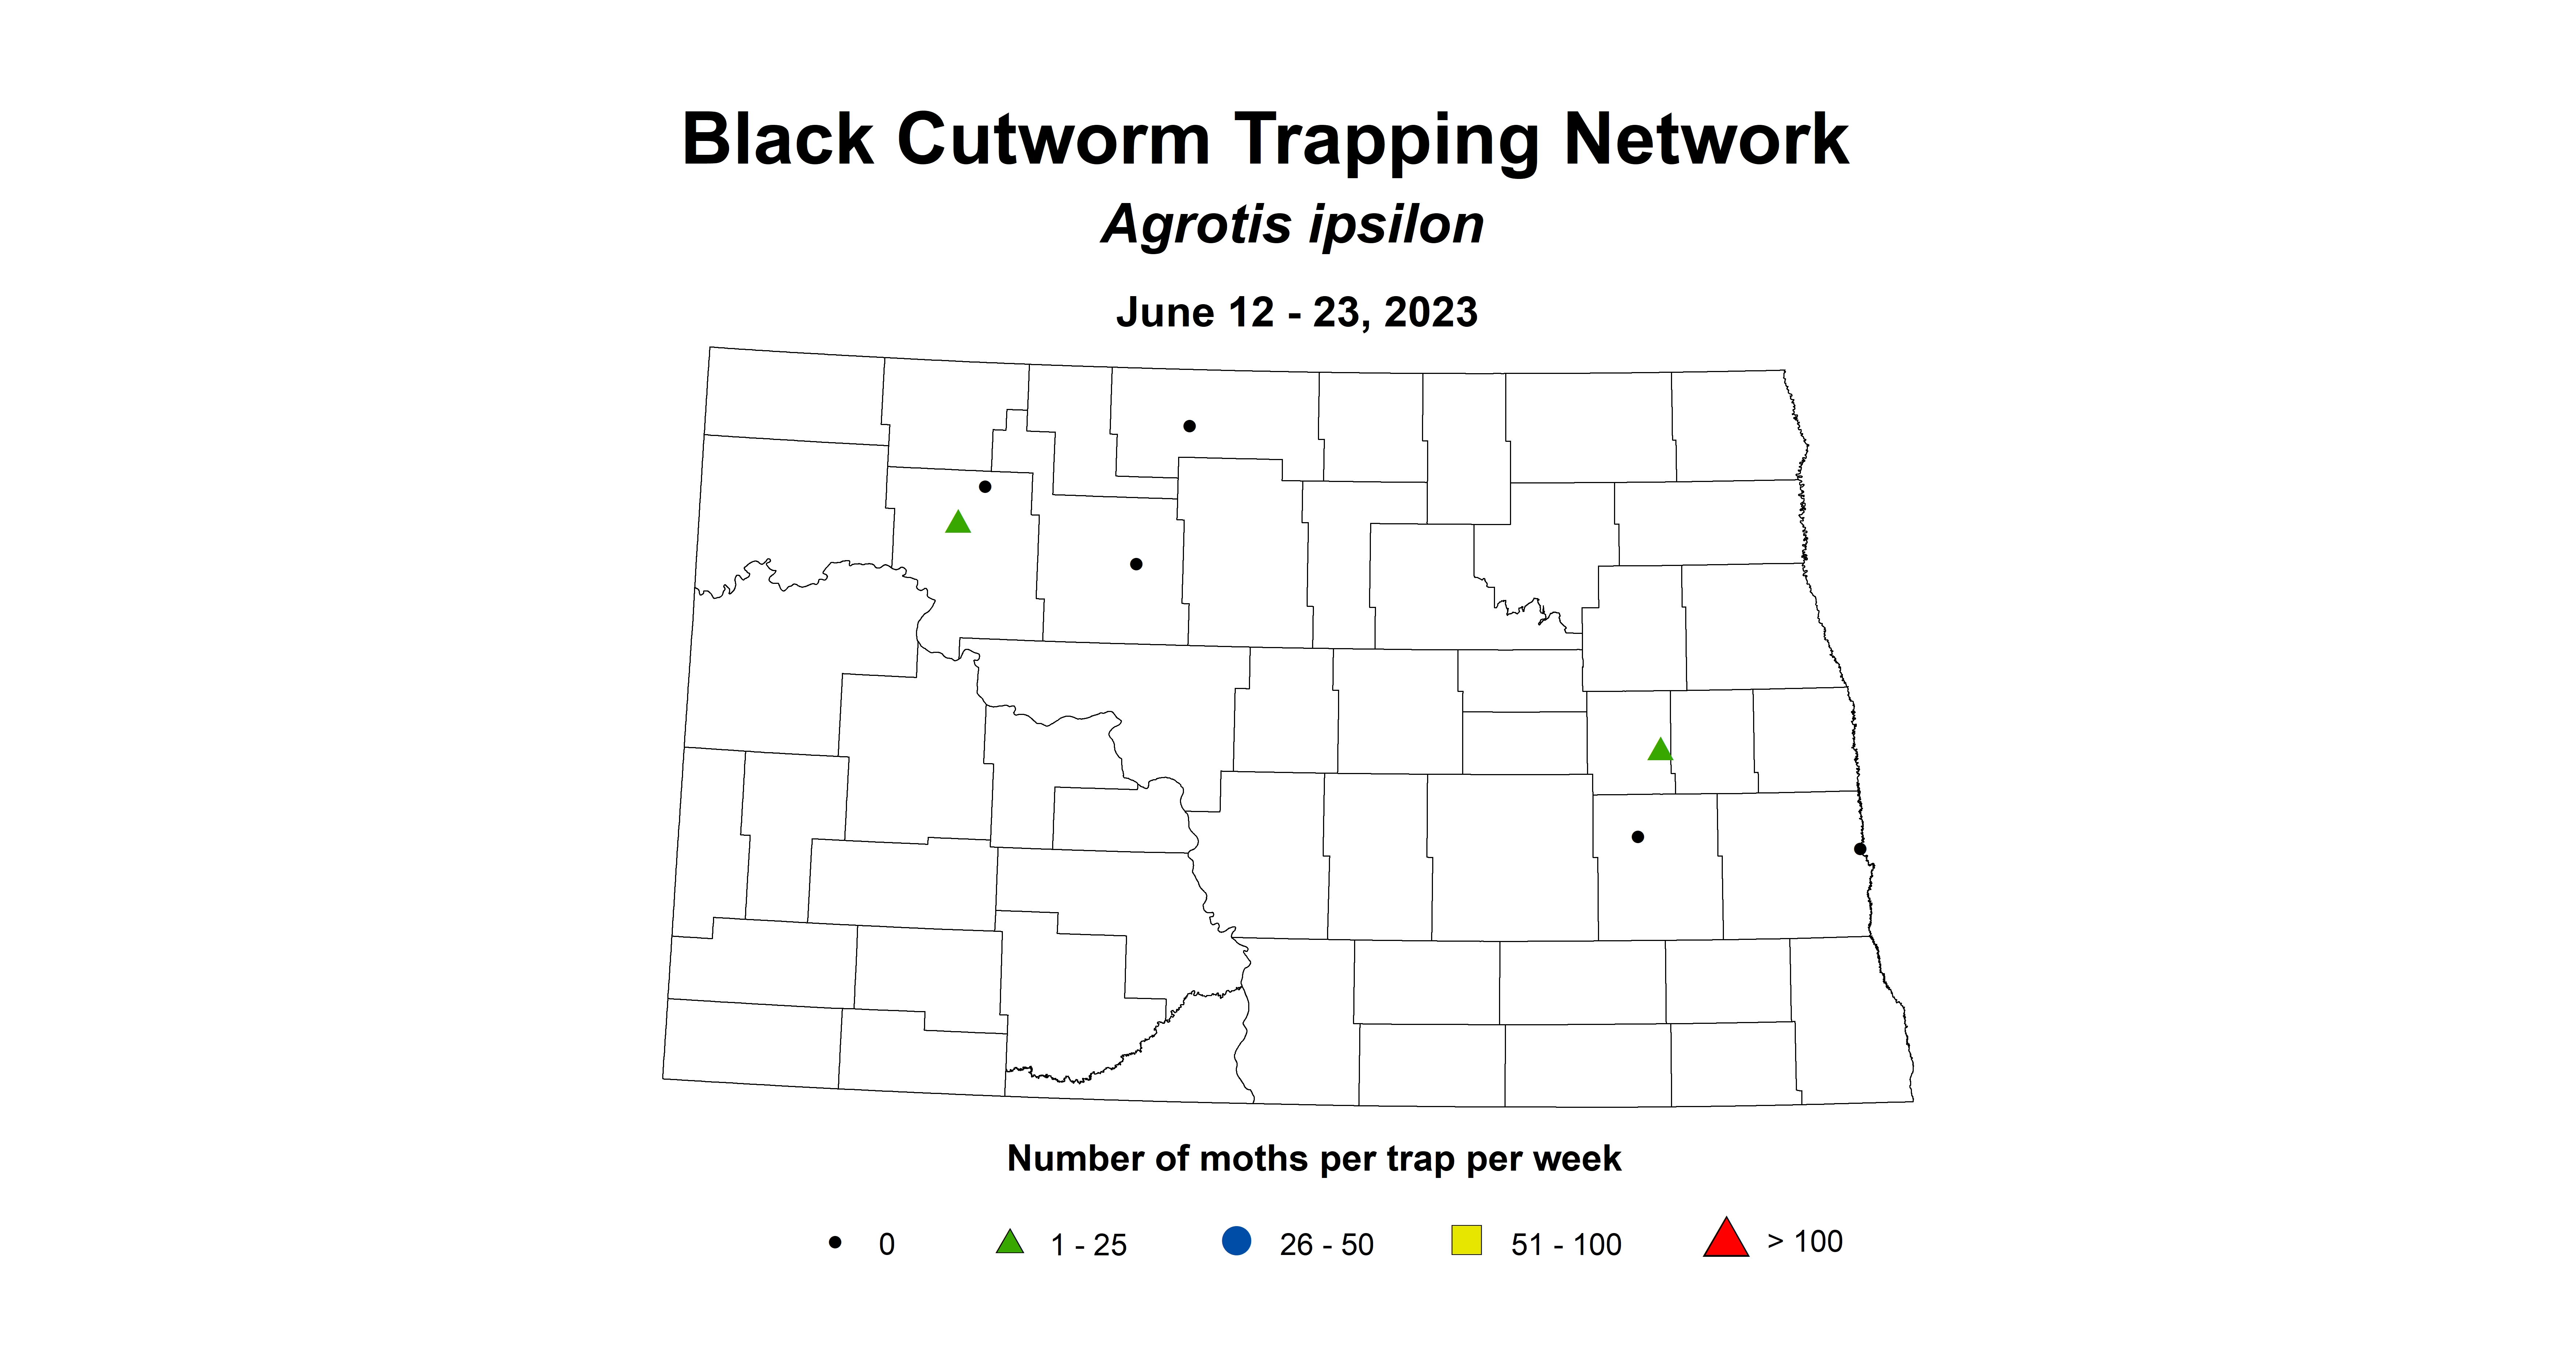 wheat insect trap black cutworm June 12-23 2023